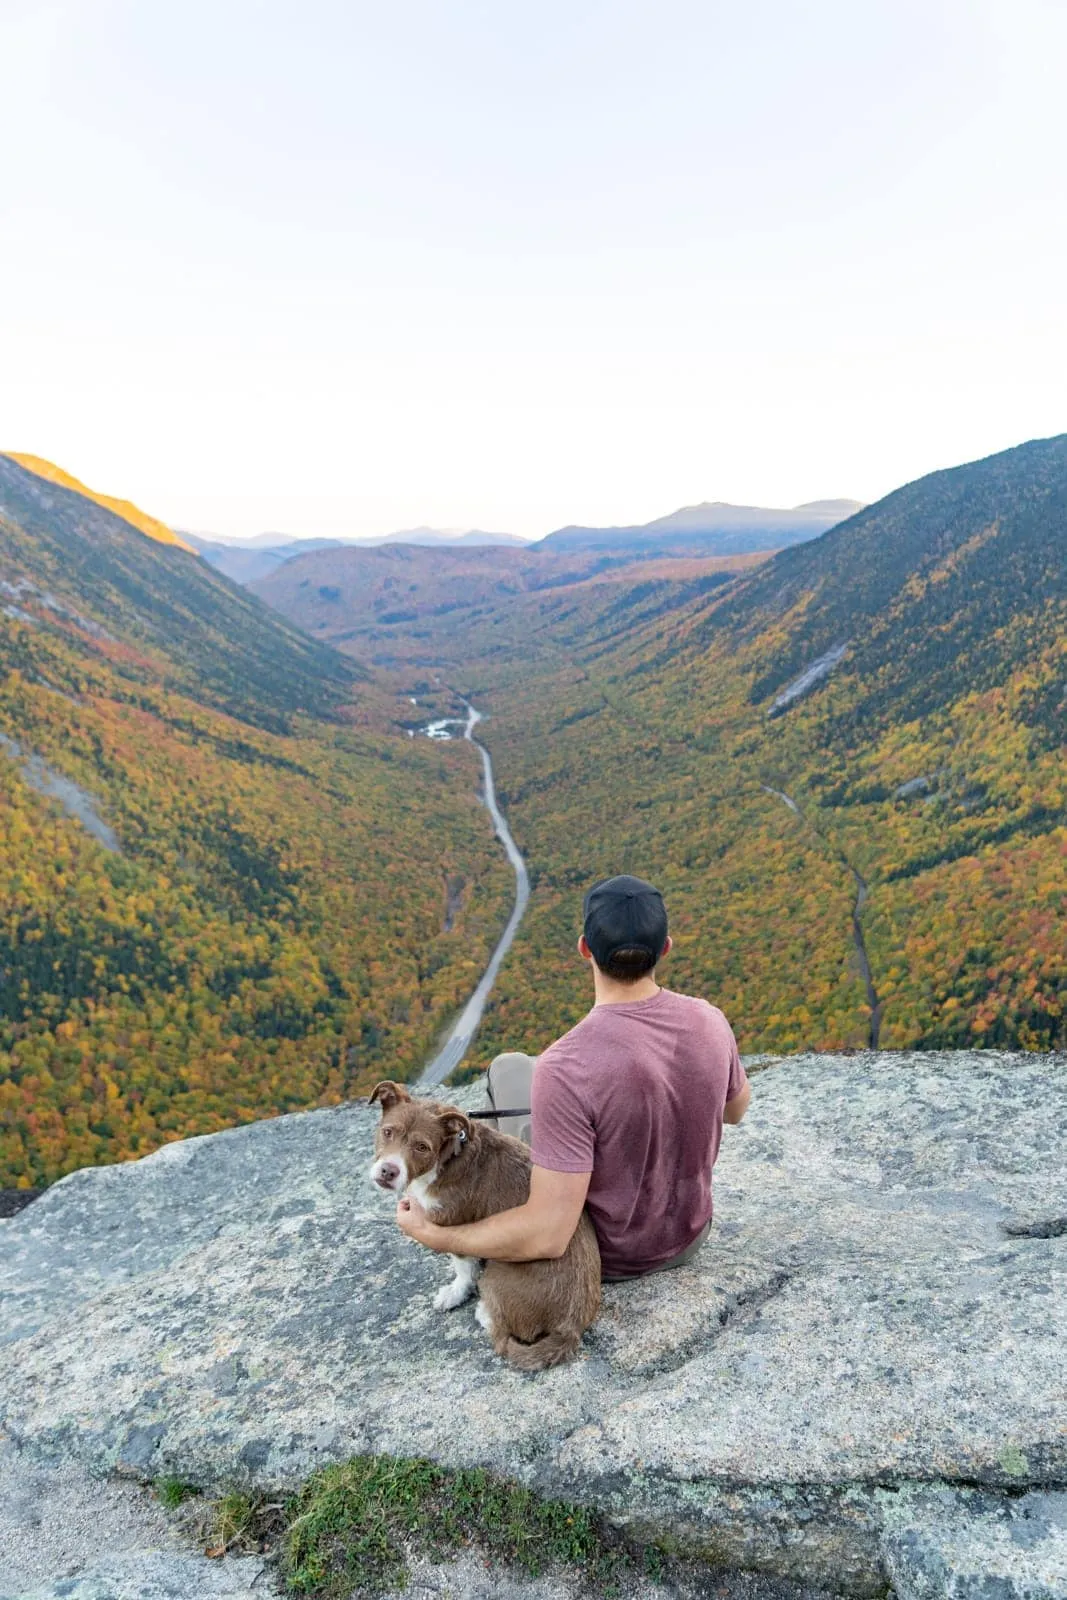 Mount Willard | Things to do in the White Mountains New Hampshire | New England Fall Road Trip